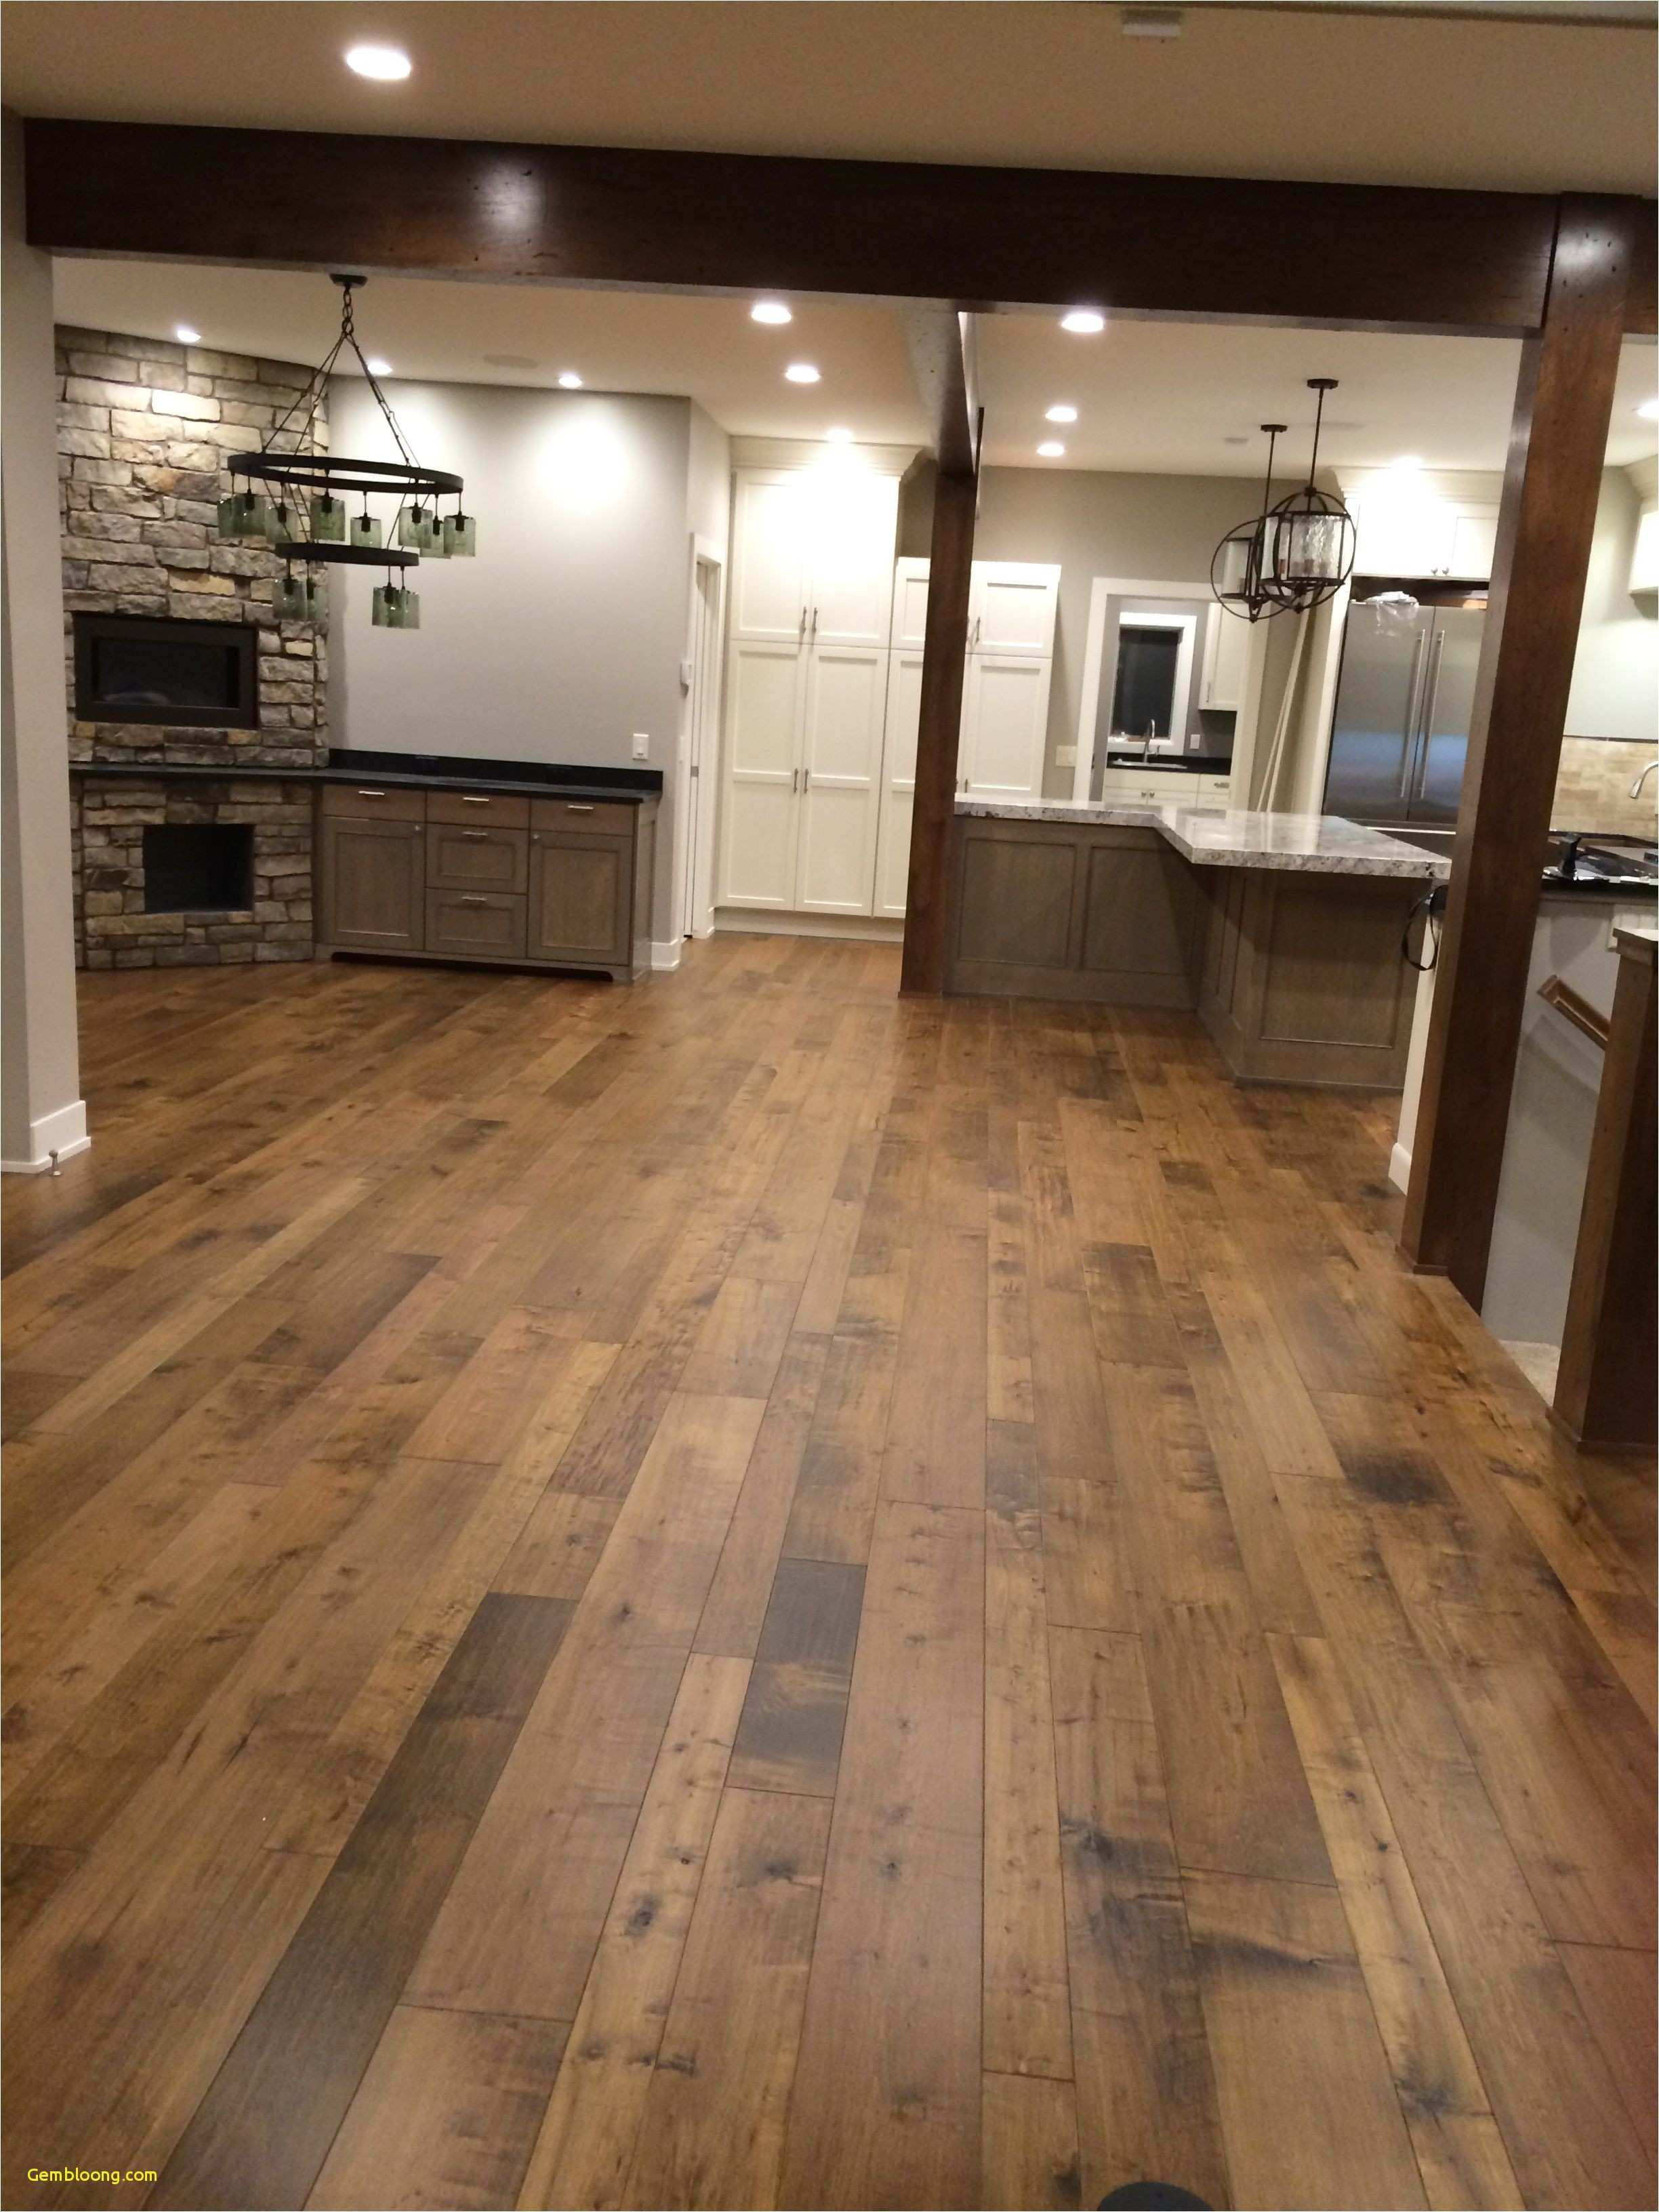 12 Wonderful Stained Hardwood Floors Pictures 2023 free download stained hardwood floors pictures of wood for floors facesinnature in hardwood flooring stores near me hardwood flooring panies near me flooring sale near me stock 0d